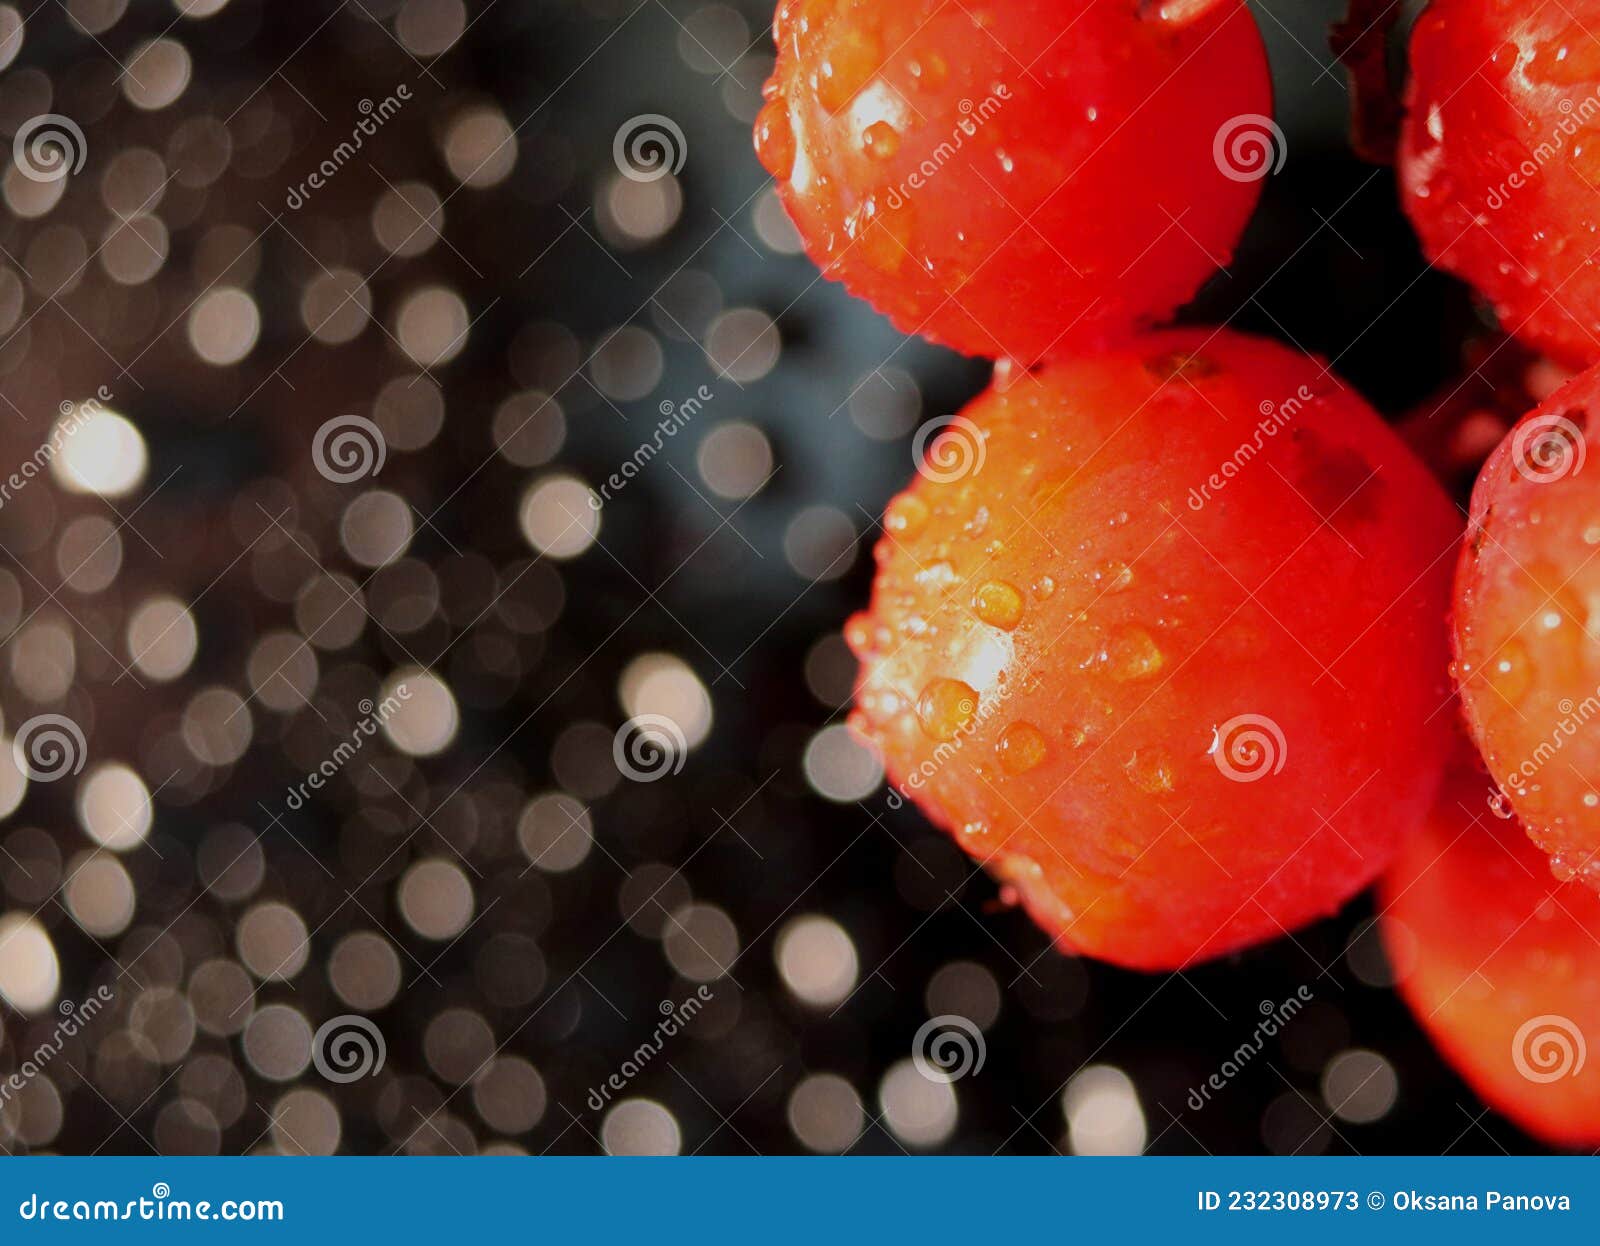 red autumn berries on a dark background with water drops in autumn, macro photography